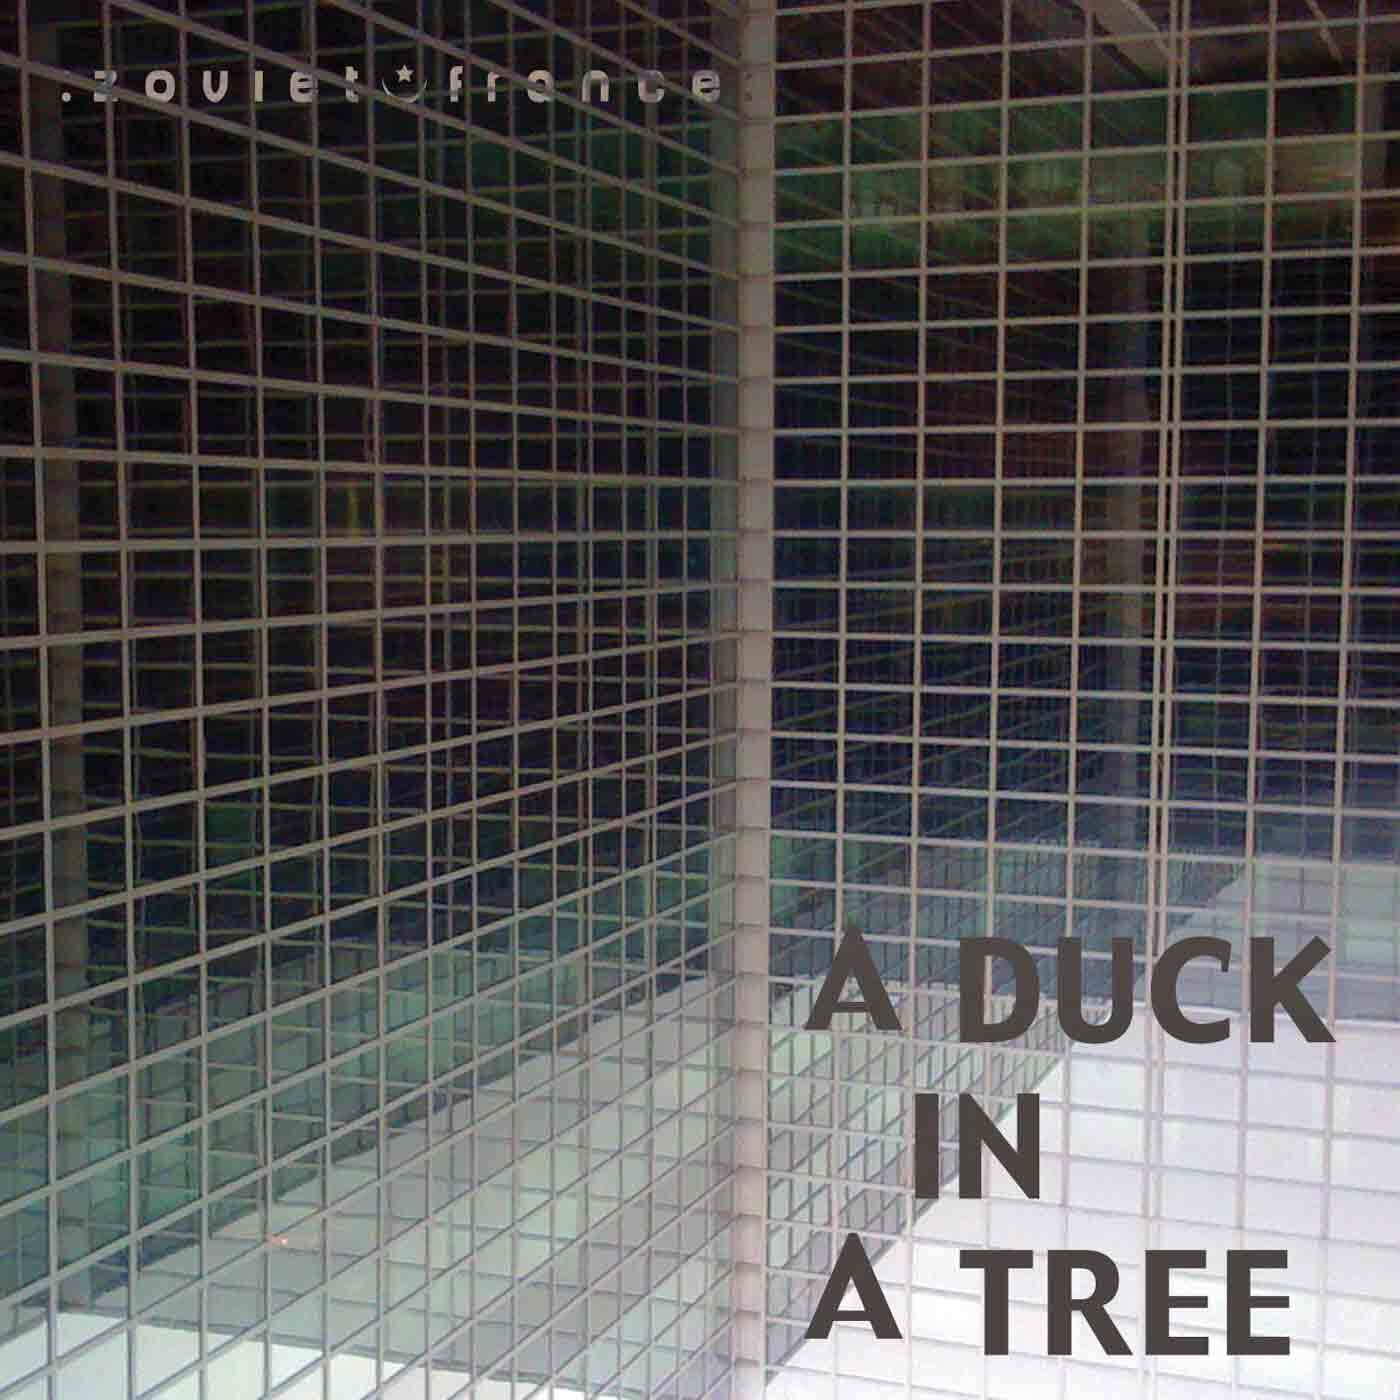 A-Duck-in-a-Tree-2013-04-27-_-And-Then-It-Happened-layout-1400.jpg